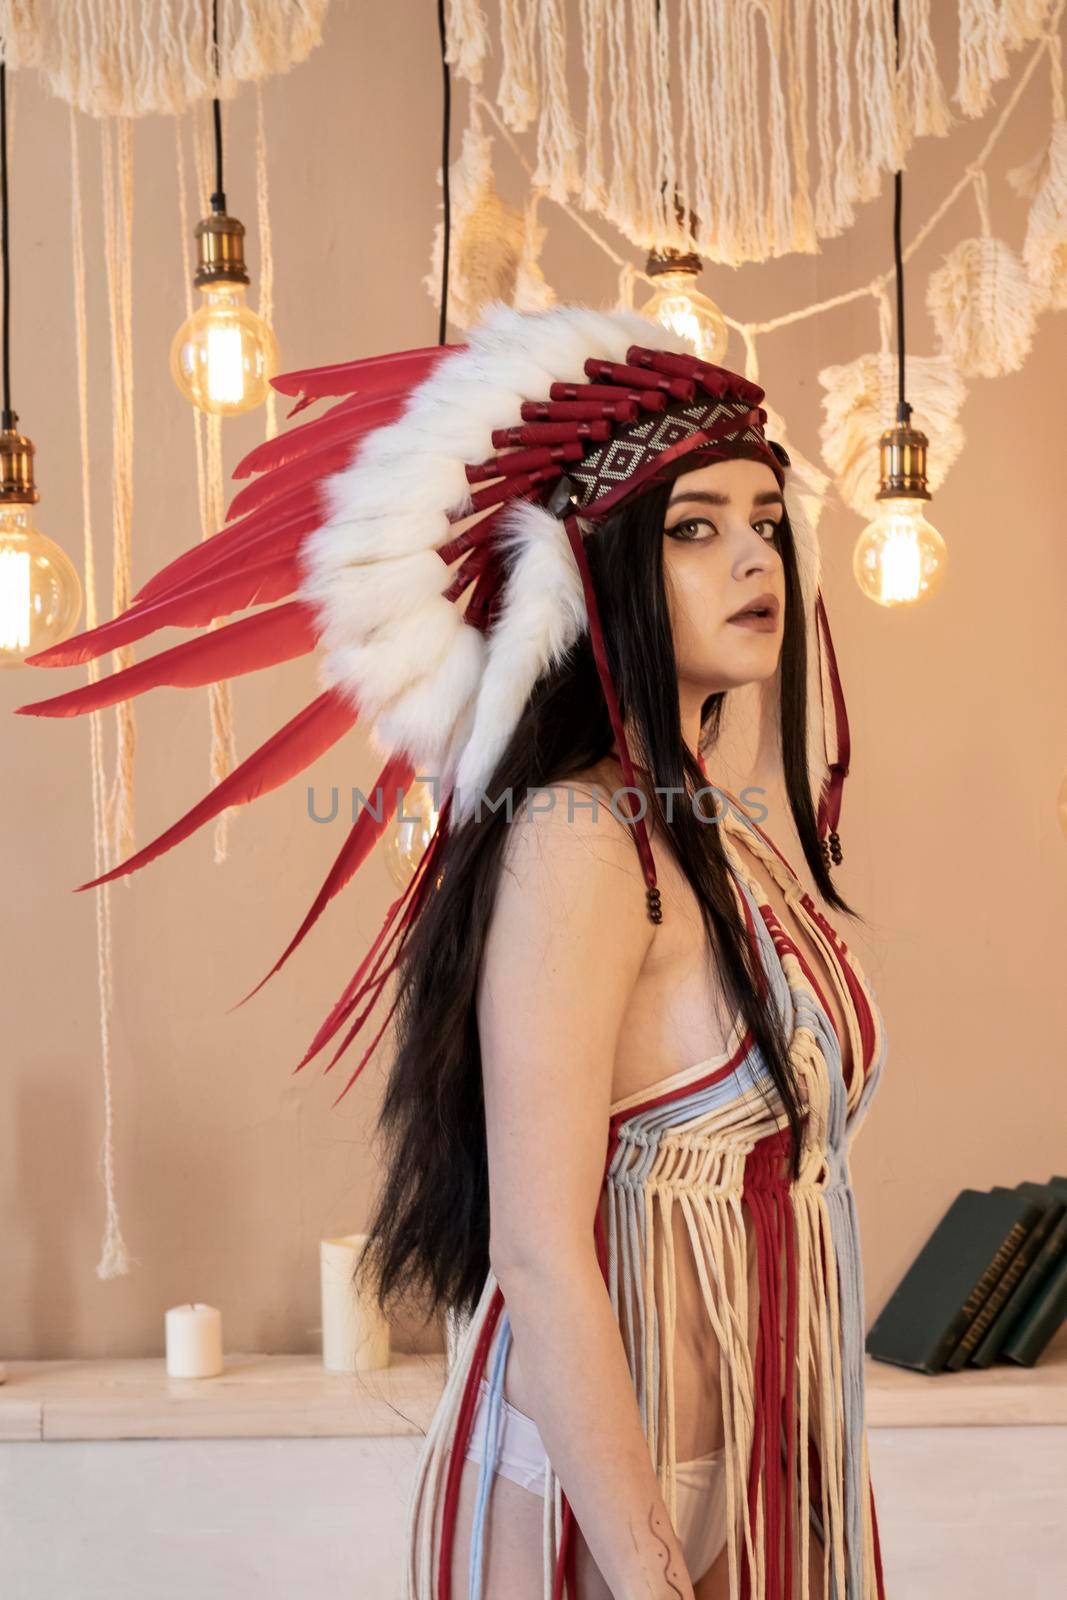 Native American Indian woman. Fashionable young lady in Indian roach. Boho style dress by Hitachin